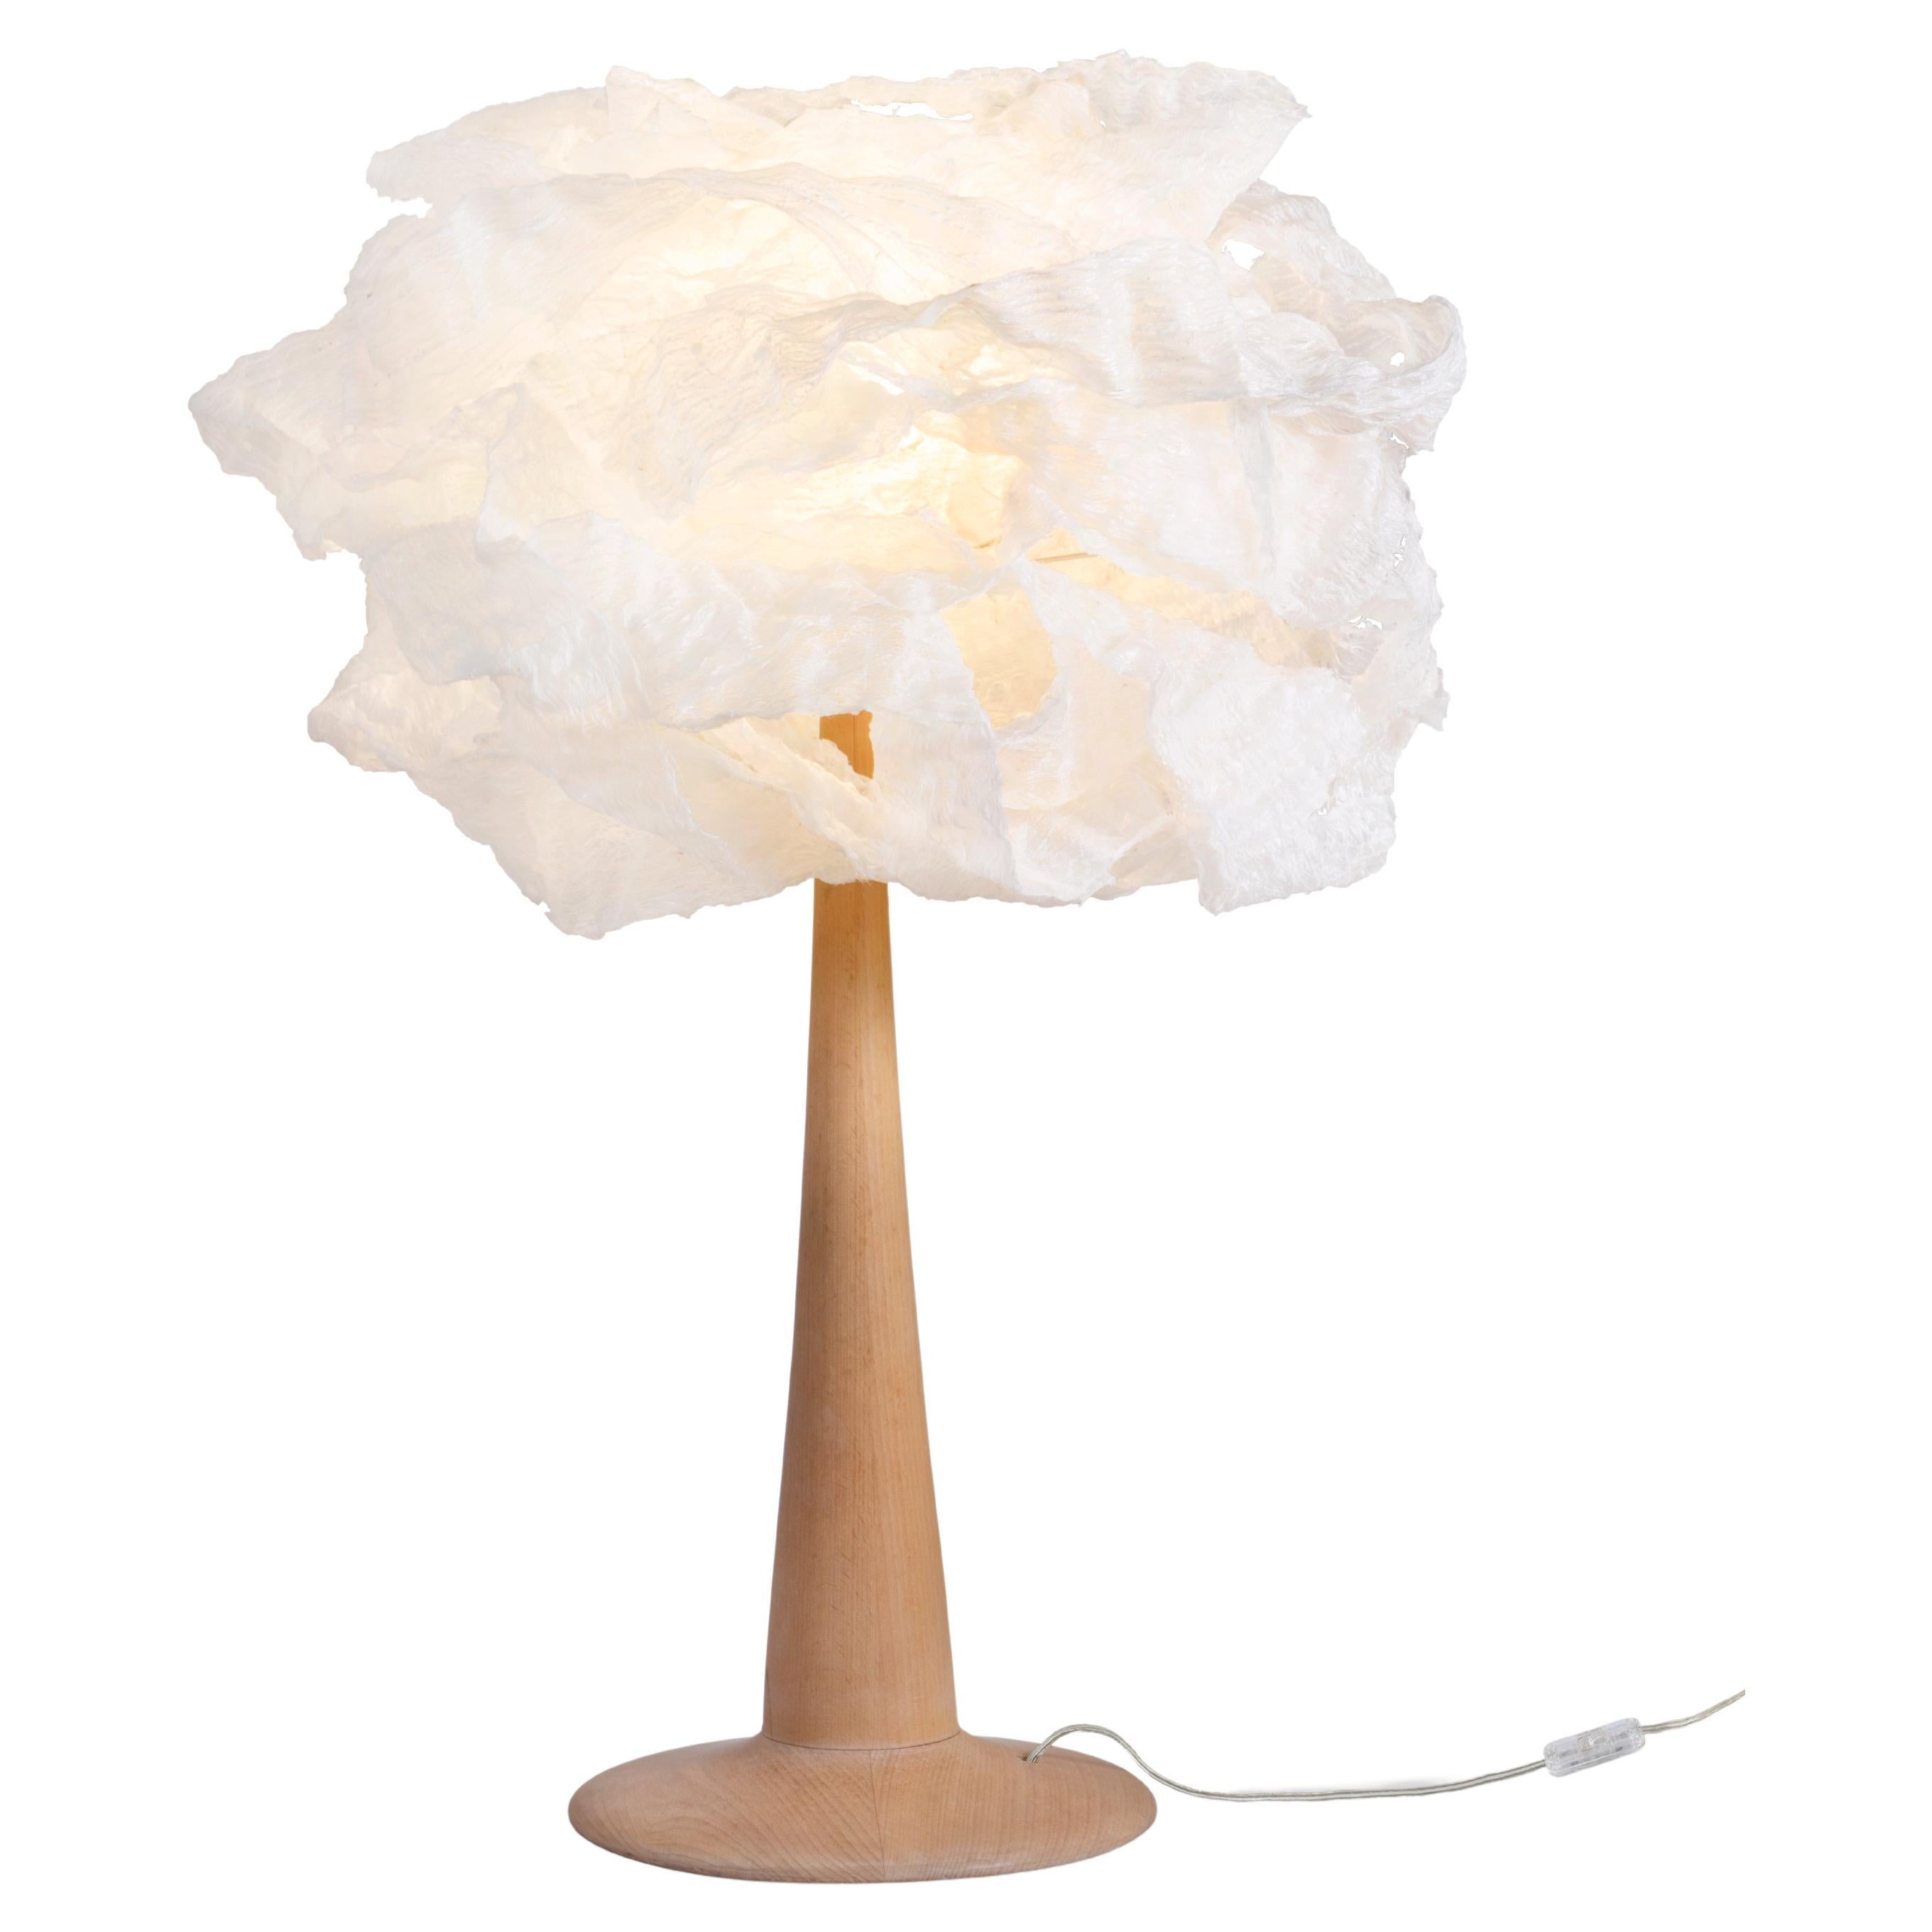 Transcendence table by Ango, Hand-Crafted Sculptural Table Lamp For Sale